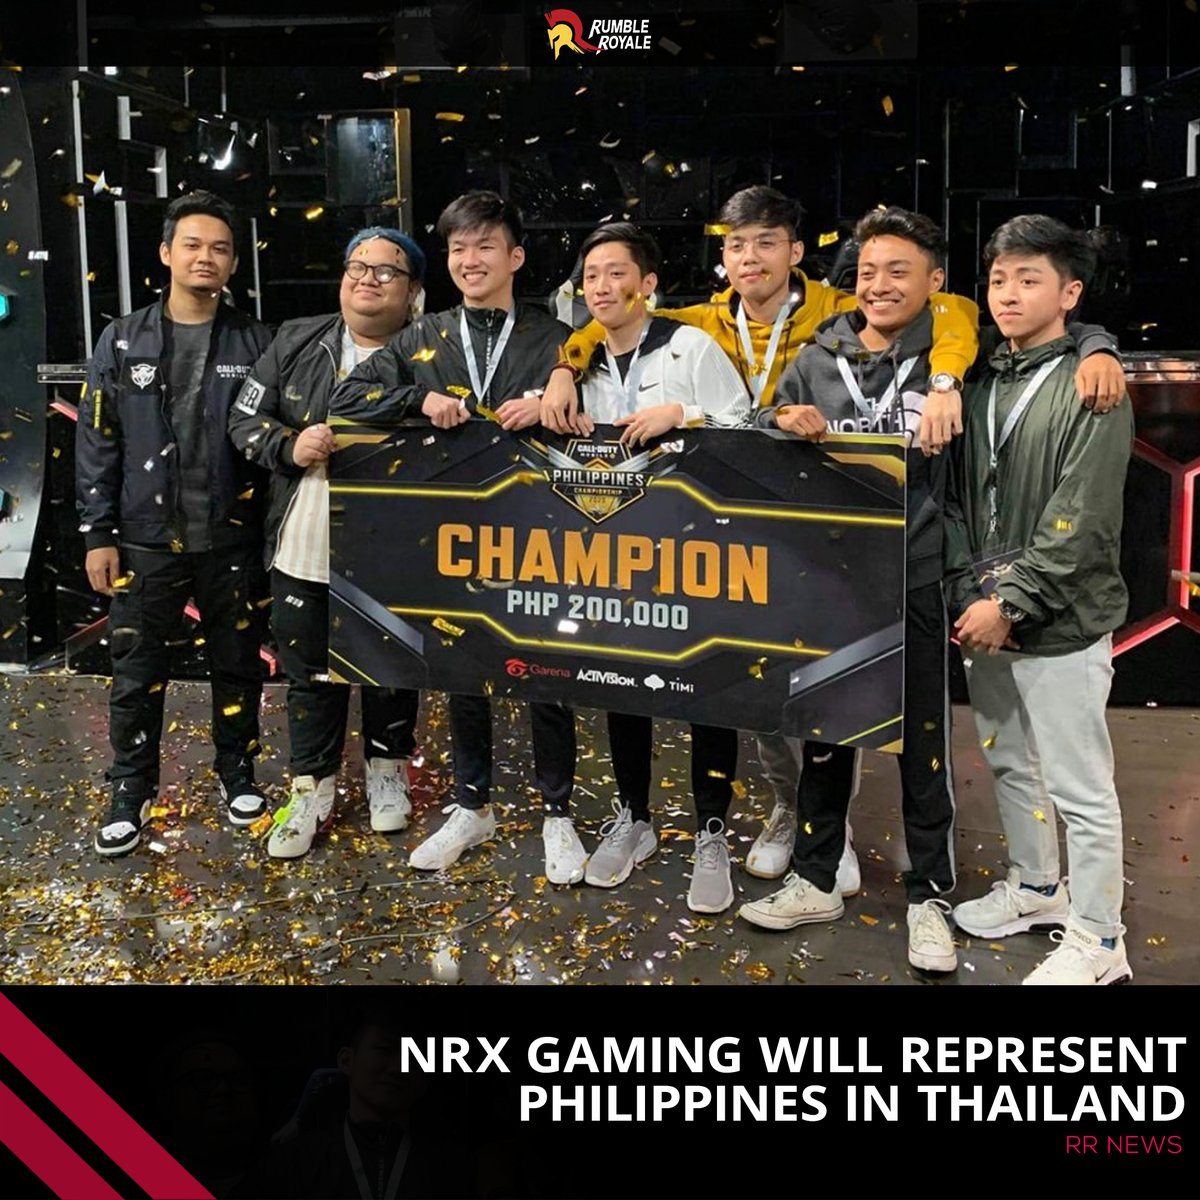 Rumble Royale On Twitter Congratulations Jayzee Kyaaah And Nrxgaming On Winning The Philippines Championship Division Of Garena Callofduty Mobile They Took Home A Prize Of Php200 000 And Will Represent Philippines In